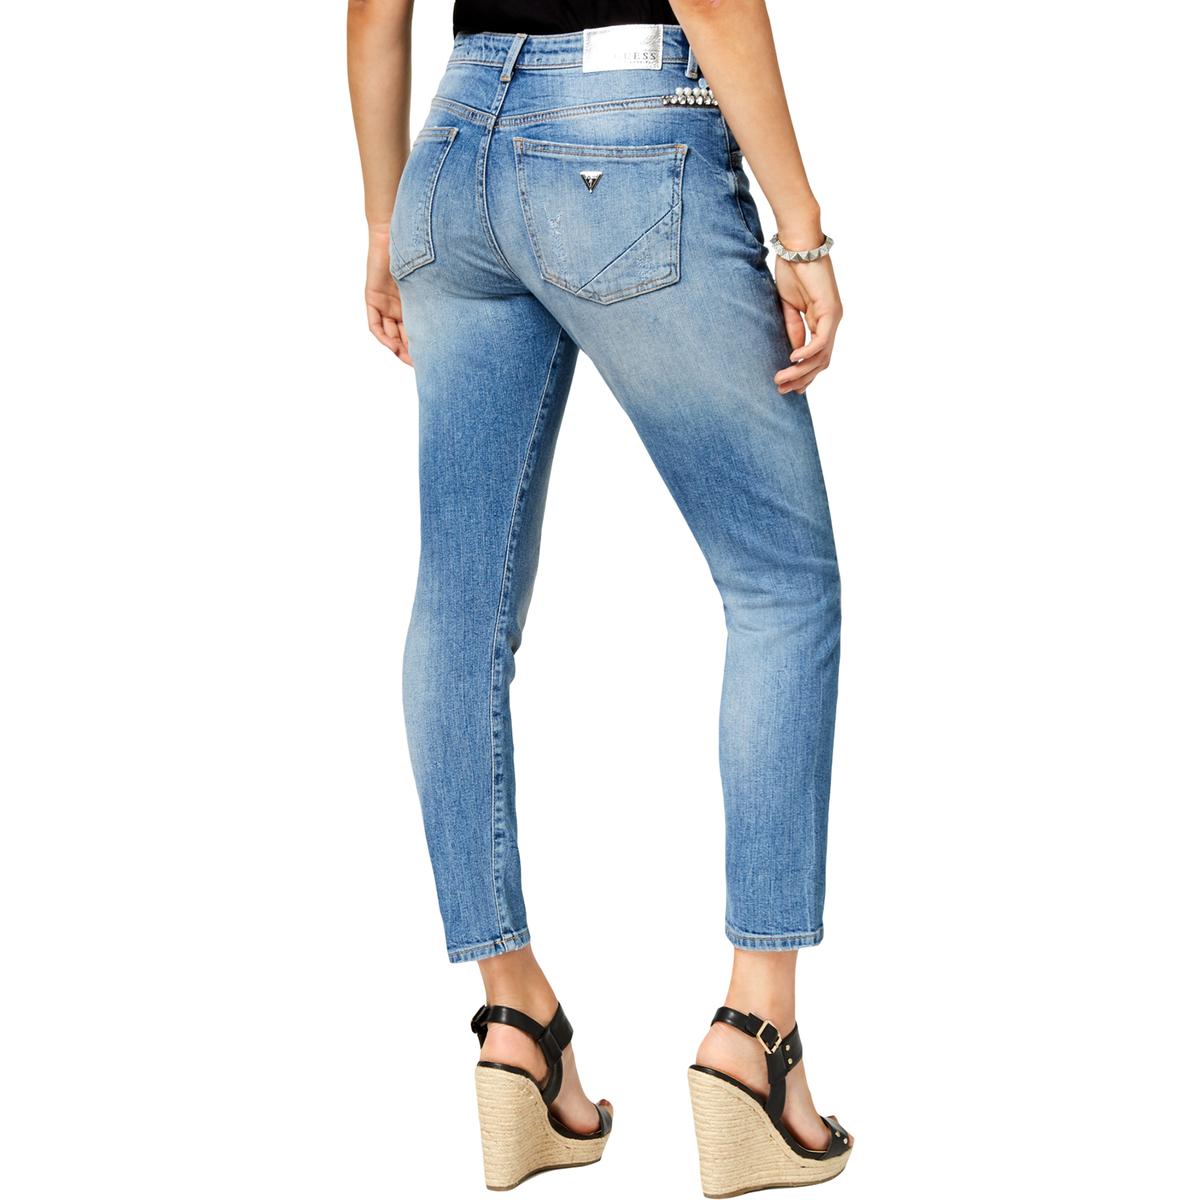 Guess Womens Blue Denim Embellished Relaxed Fit Skinny Jeans 29 BHFO